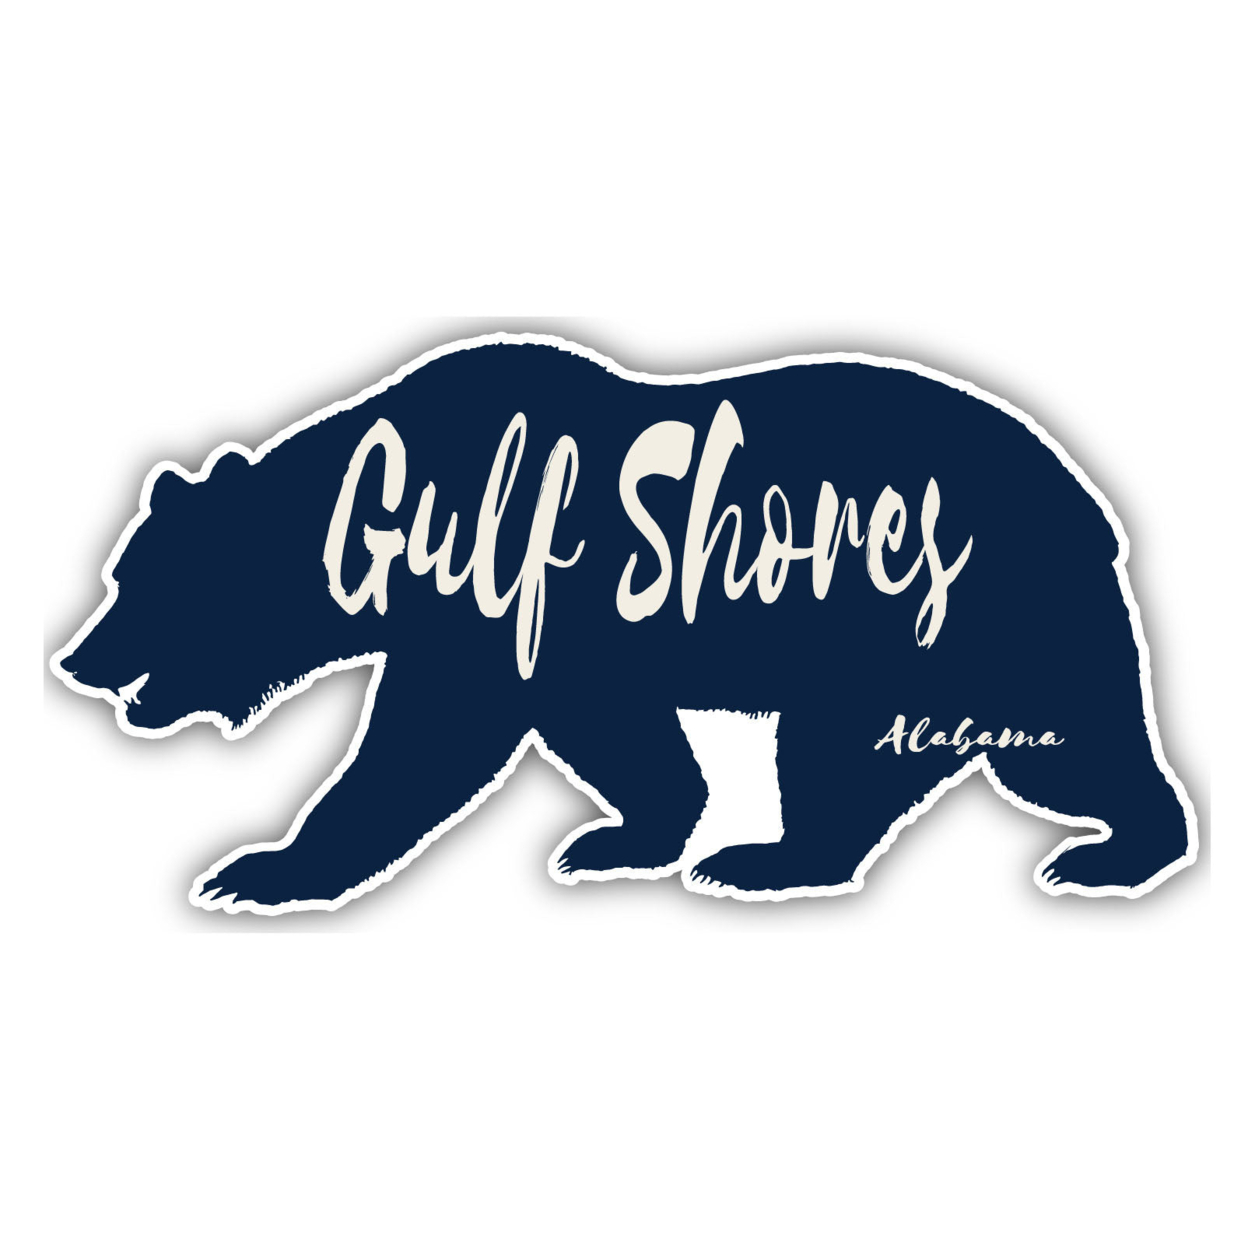 Gulf Shores Alabama Souvenir Decorative Stickers (Choose Theme And Size) - 4-Pack, 12-Inch, Bear